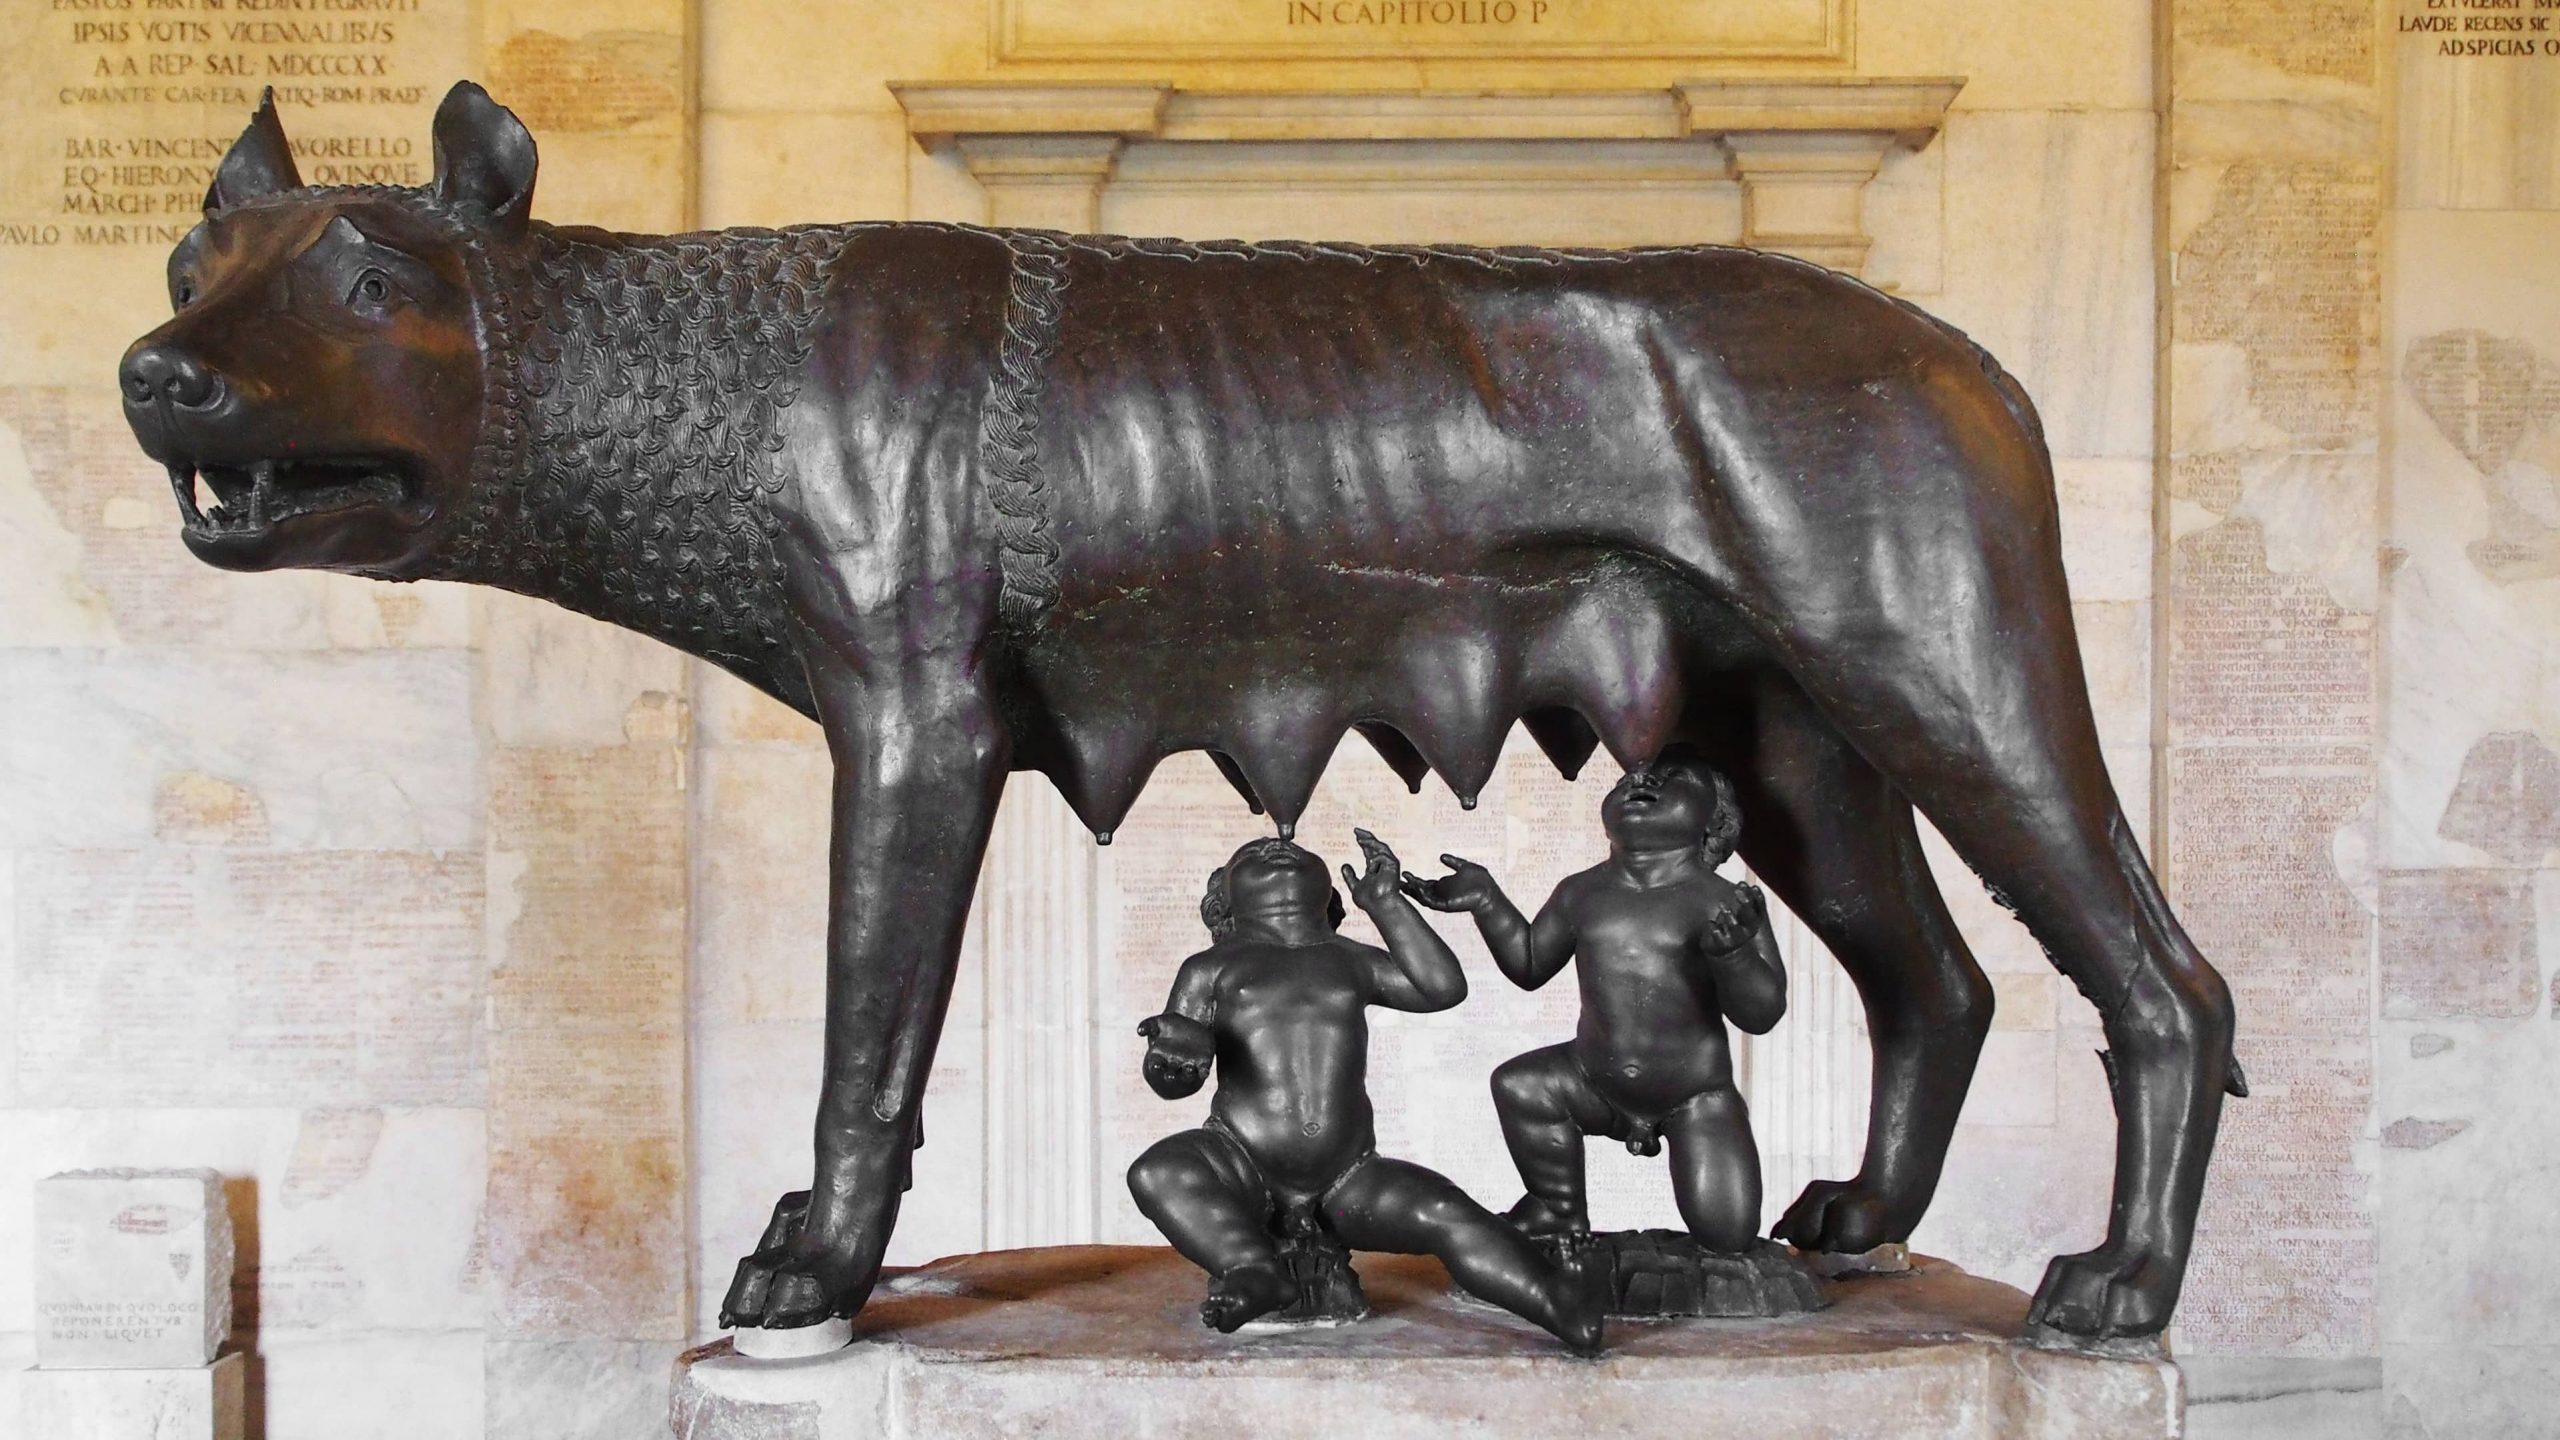 Famous Shewolf statue at the Capitoline Museum in Rome